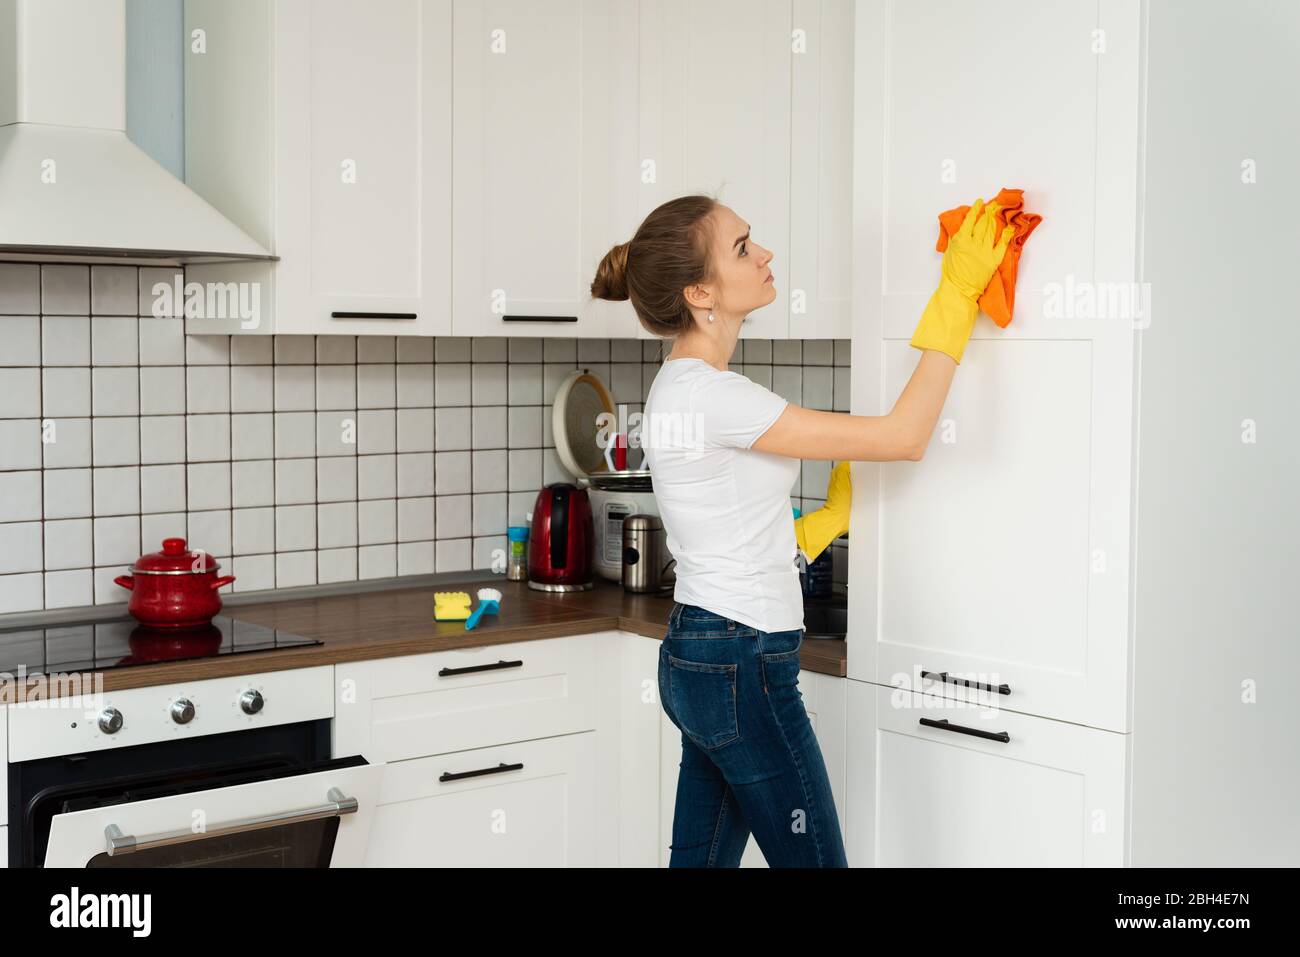 The concept of spring cleaning, cleaning company. young woman cleaning a surface of white kitchen wall cabinet, wearing rubber protective yellow gloves, with rag. Home, housekeeping concept. Stock Photo